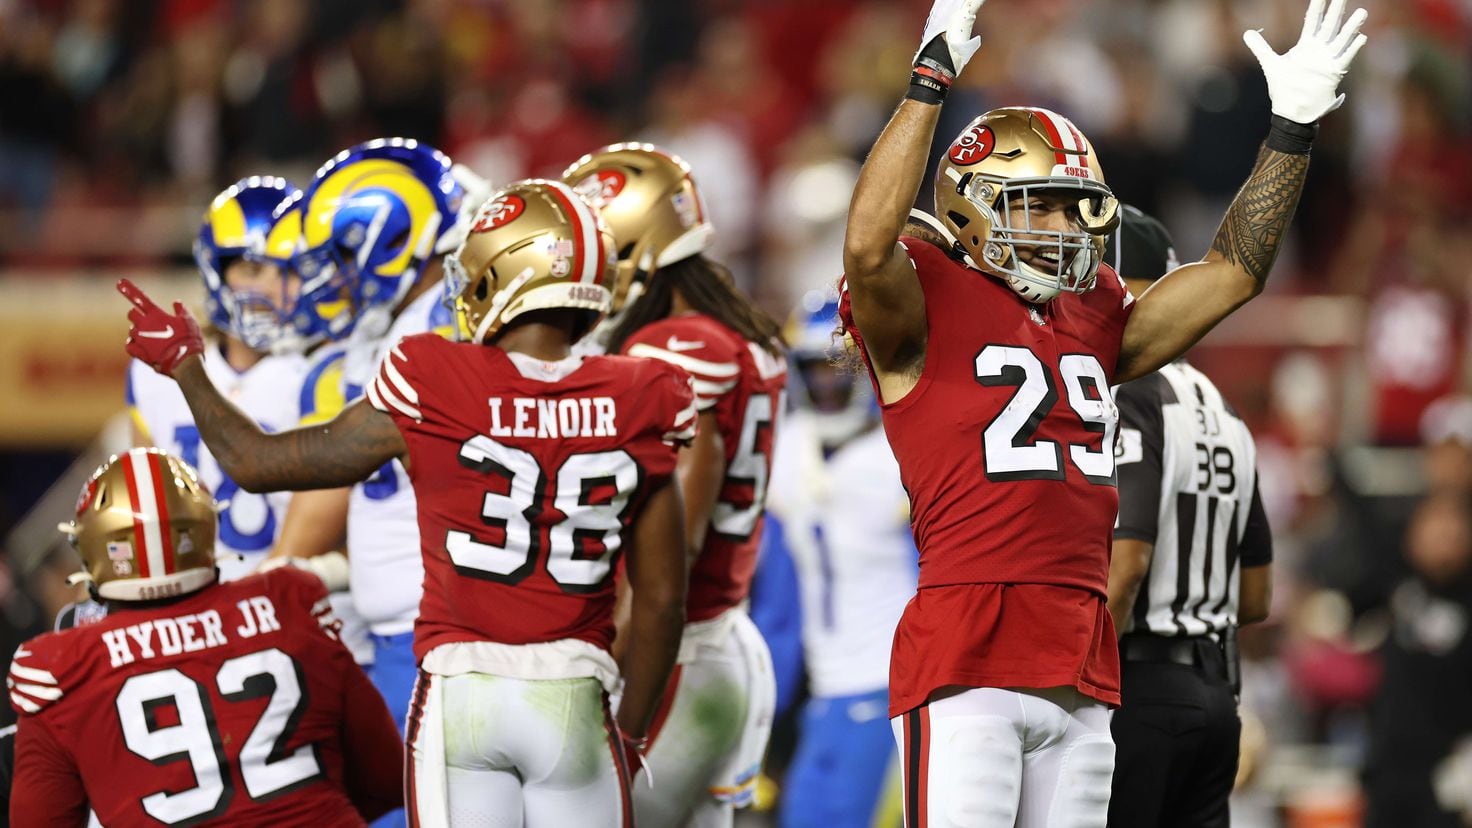 San Francisco 49ers vs. Los Angeles Rams odds for NFC Championship